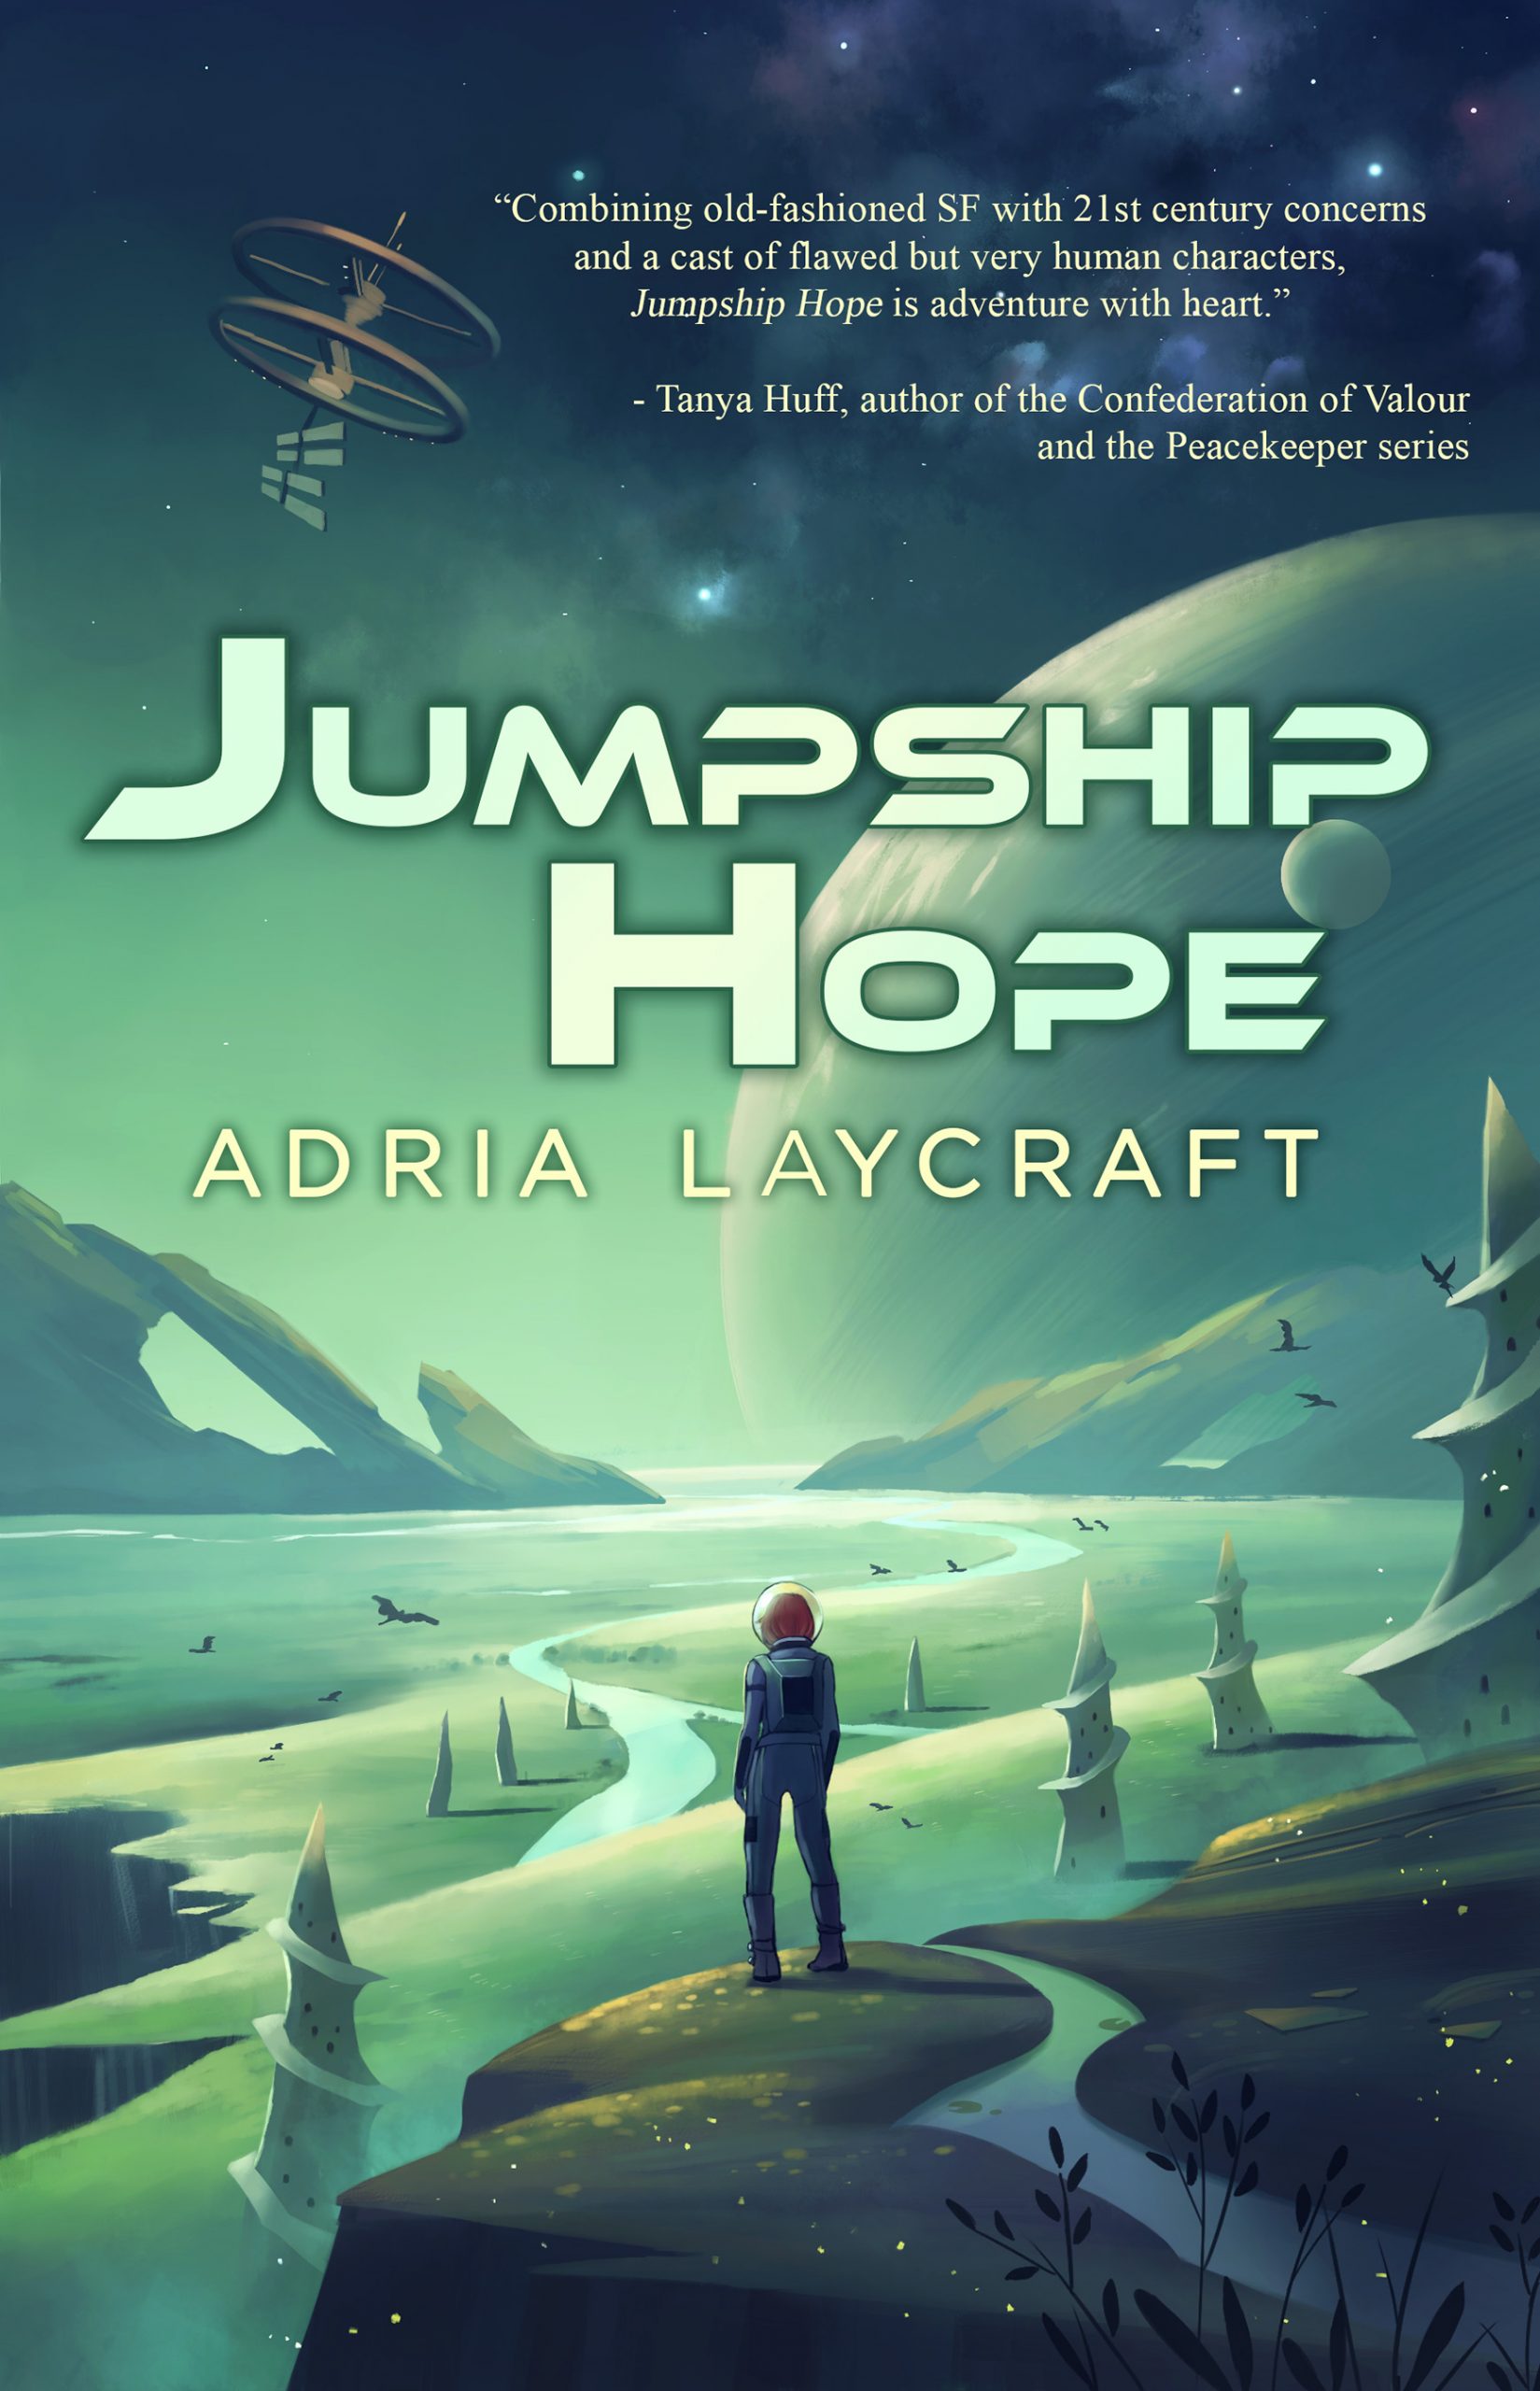 Book cover of Jumpship Hope a science fiction novel